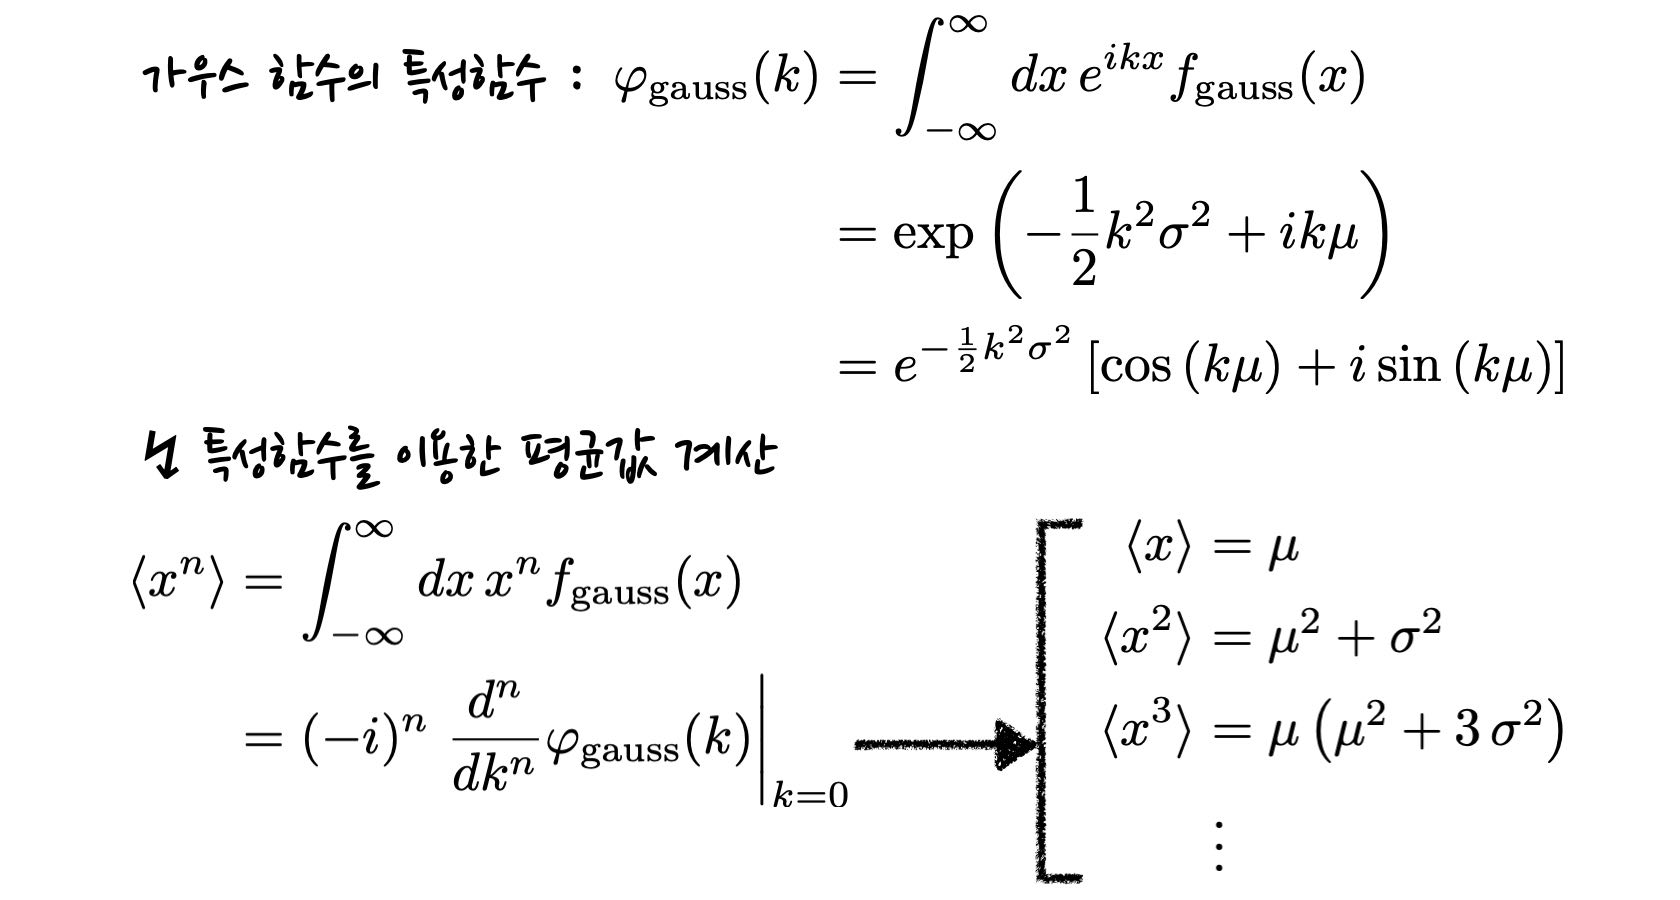 formulae for the characteristic function of Gaussian distribution function. It also demonstrates how to compute statistical moments by taking derivatives of the characteristic function.